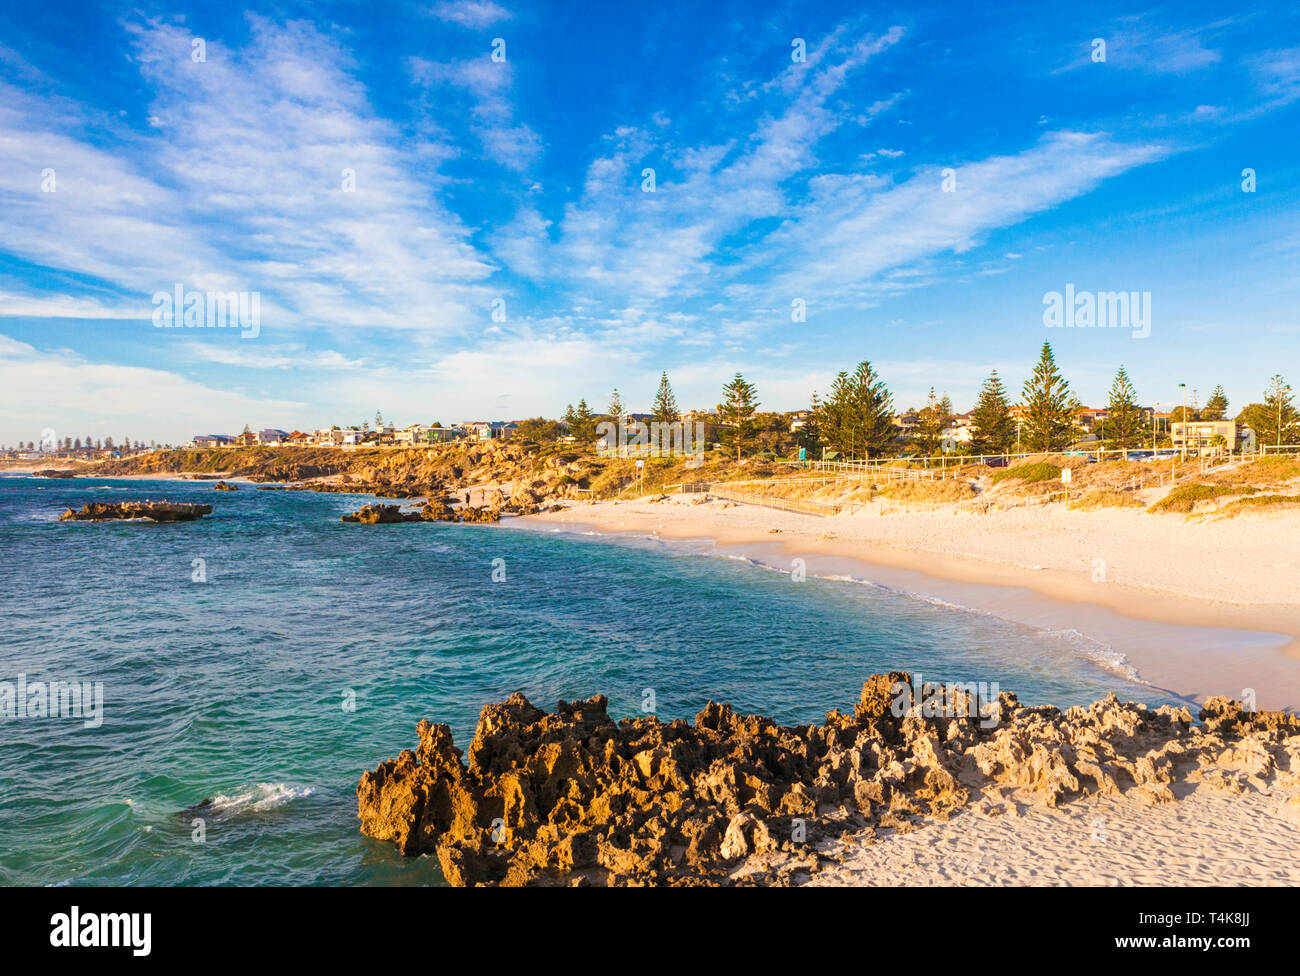 Trigg Beach on the coast of Perth's northern suburbs Stock Photo